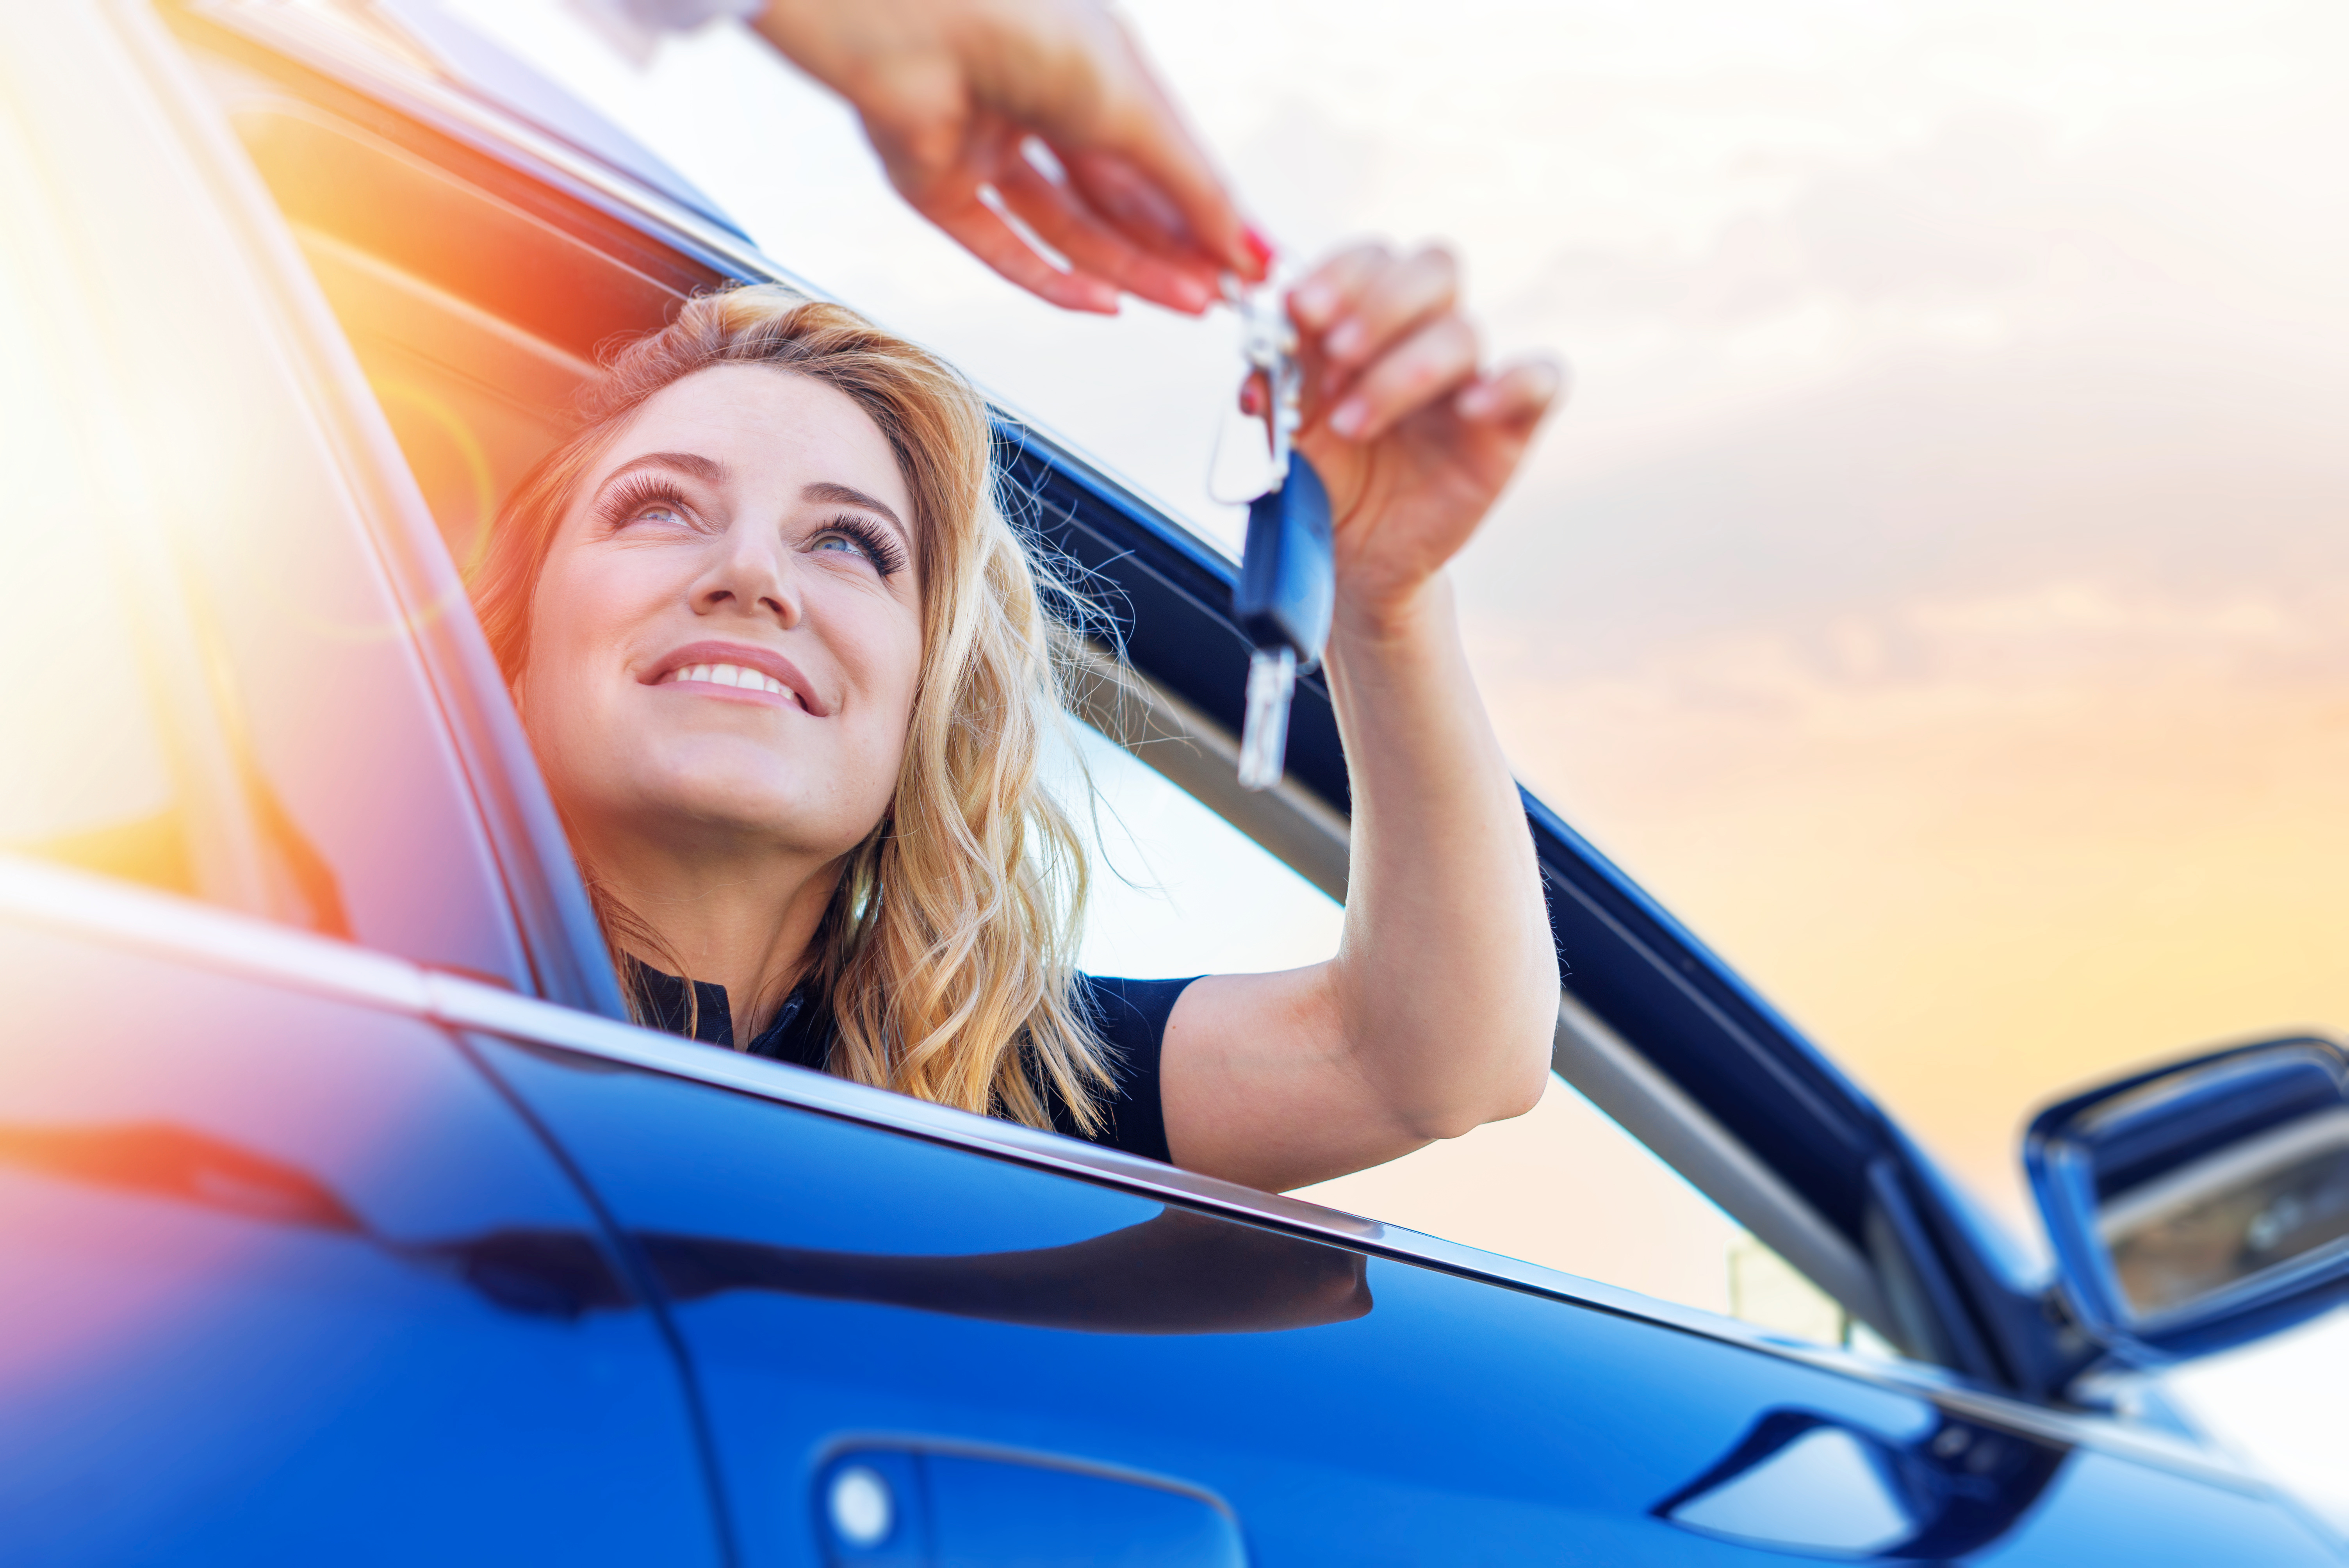 A woman holding the key to buy the car